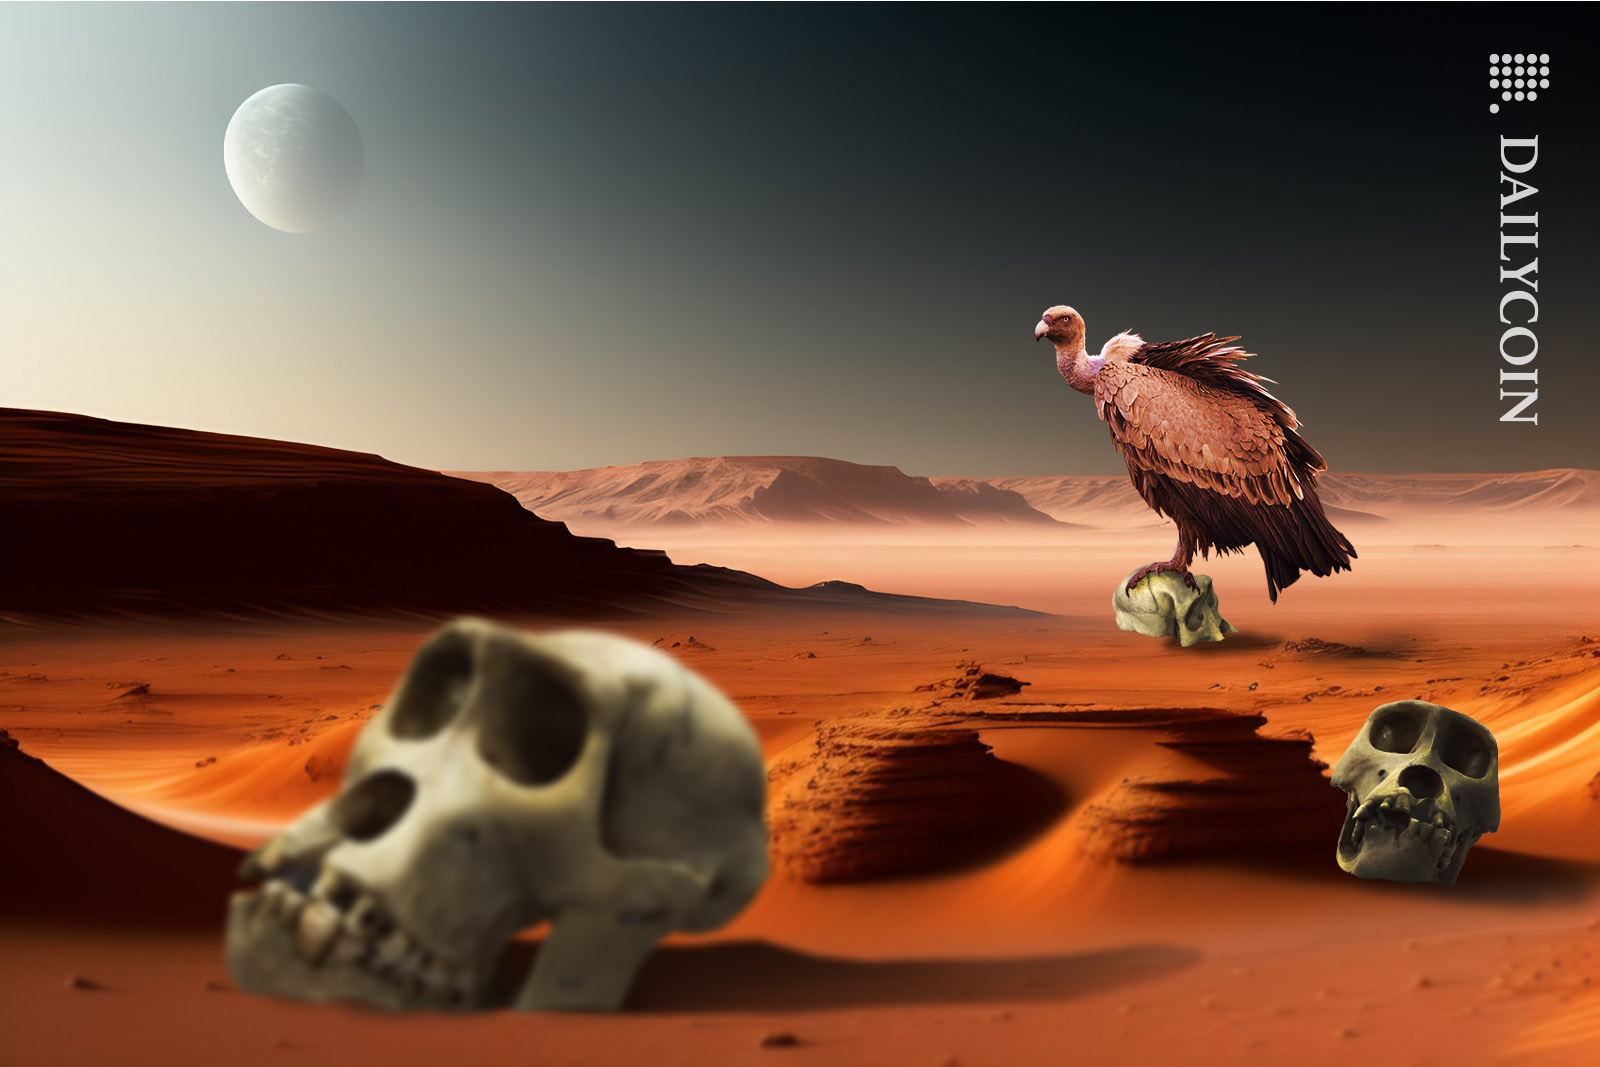 Ape skulls scattered around in a barren desert, A vulture sitting on one of them.